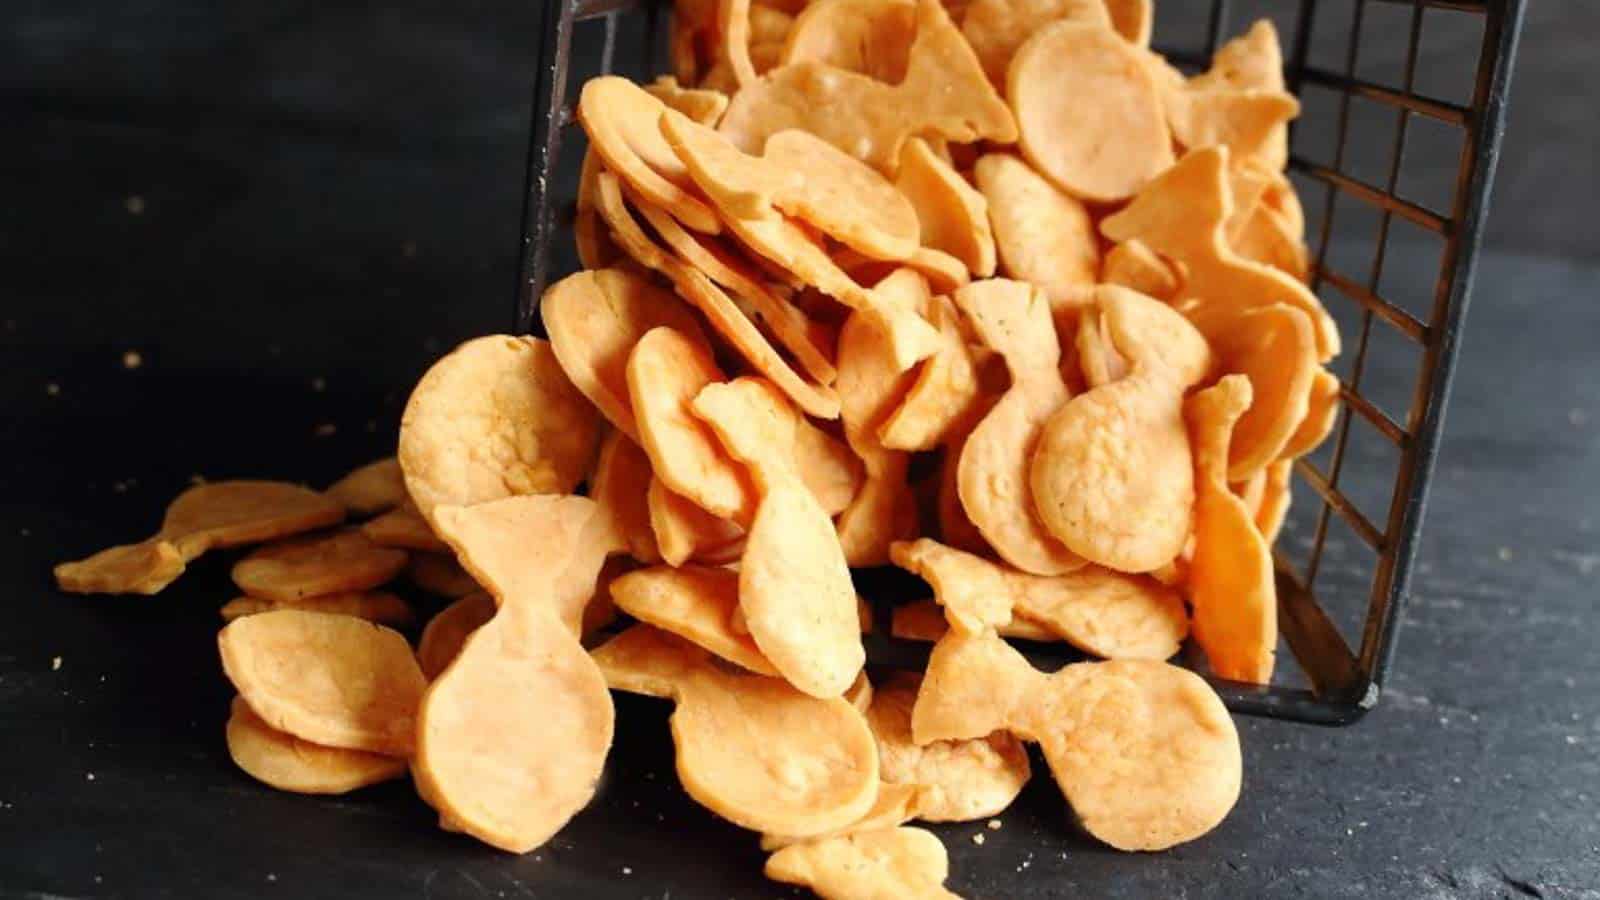 <p>Experience the golden goodness of these homemade goldfish crackers that will transport you to snacking paradise. These fish-shaped delights are crispy, flavorful, and utterly addictive. Prepare to embark on a lunch box snacking adventure with these golden treats.<br><strong>Get the Recipe: </strong><a href="https://www.lowcarb-nocarb.com/low-carb-keto-goldfish-crackers/?utm_source=msn&utm_medium=page&utm_campaign=msn">Golden Fishy Goodness</a></p>